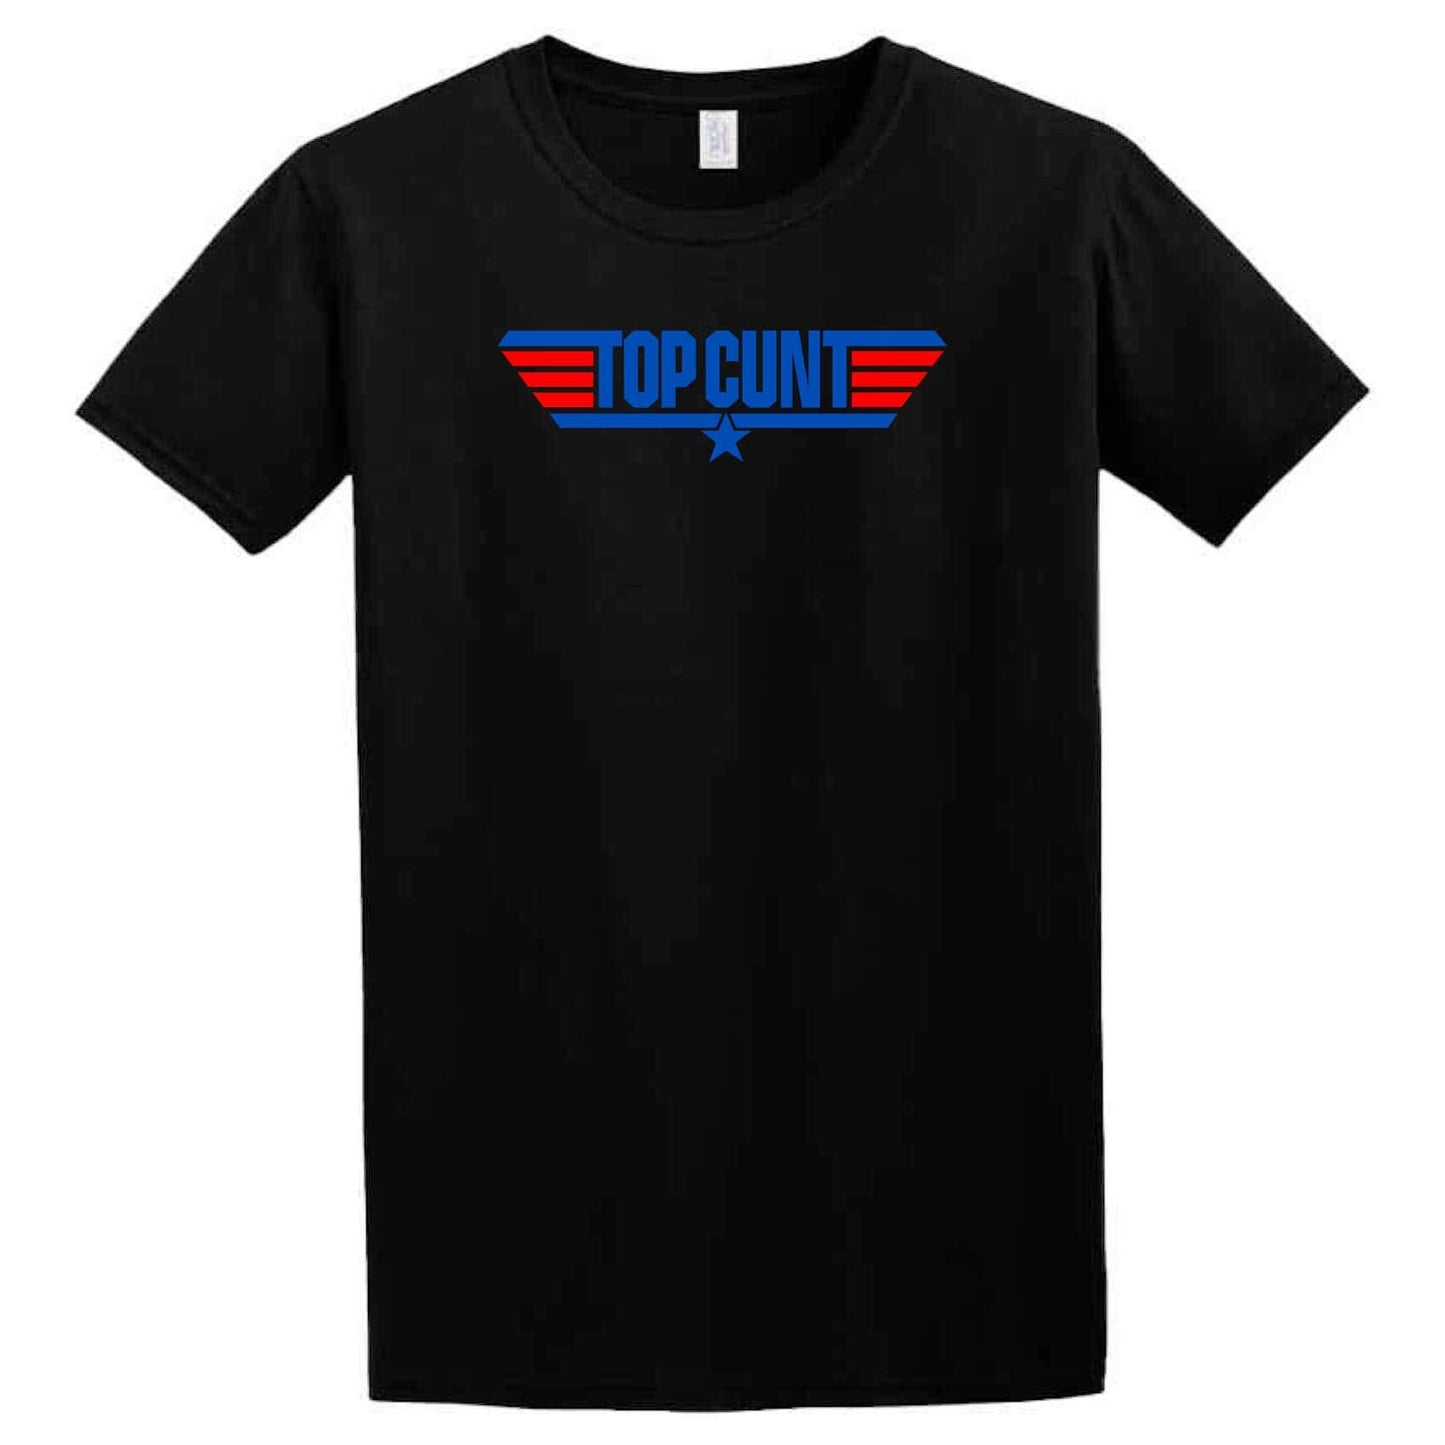 Get your hands on this high-quality, black Twisted Gifts Top Cunt t-shirt featuring the iconic words "Top Gun." Embrace the nostalgia of this 80s classic movie with a comfortable and stylish piece.